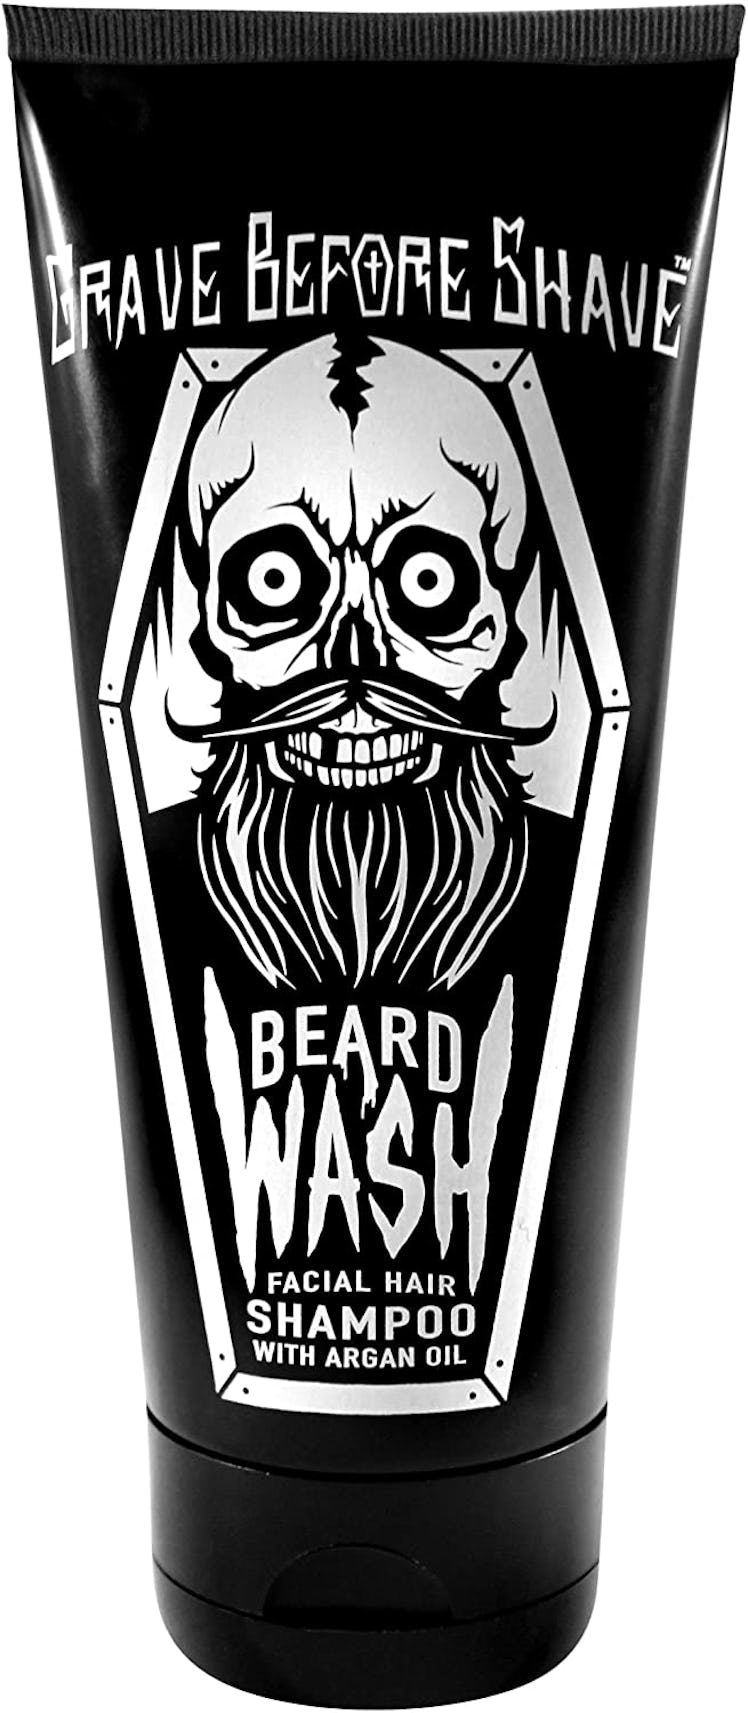 Grave Before Shave Beard Wash, 6 oz.